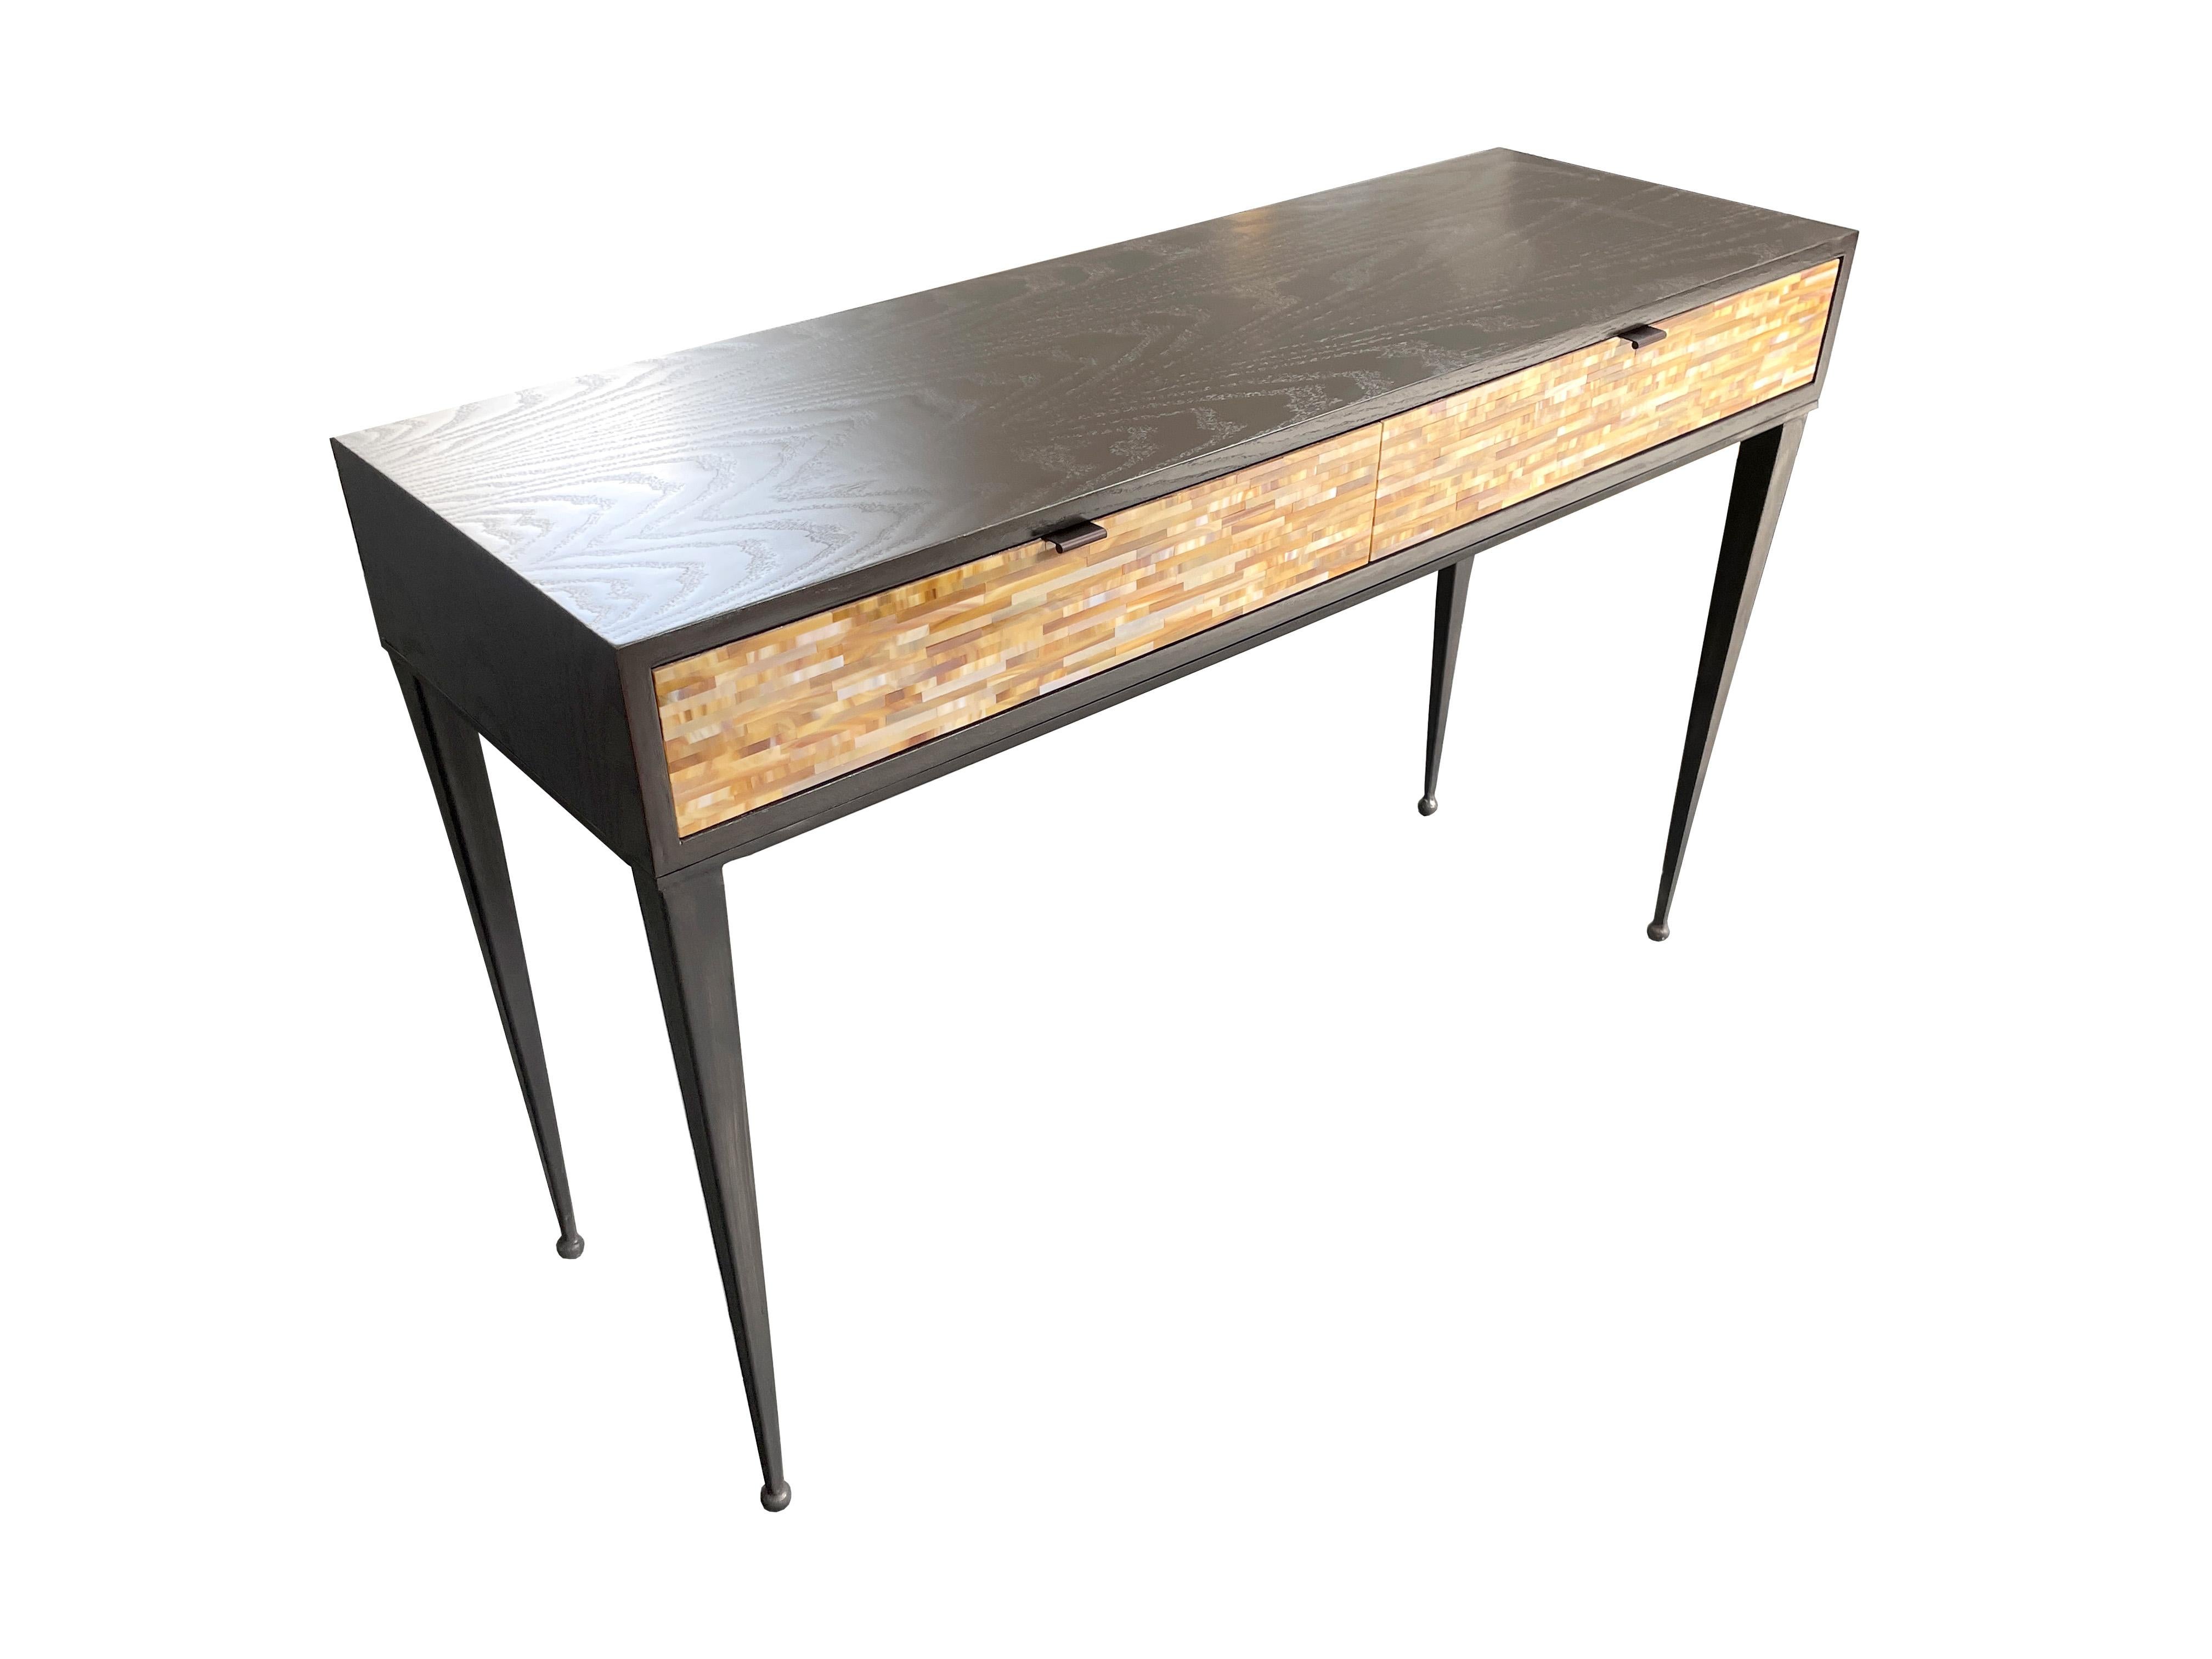 This is a very attractive and functional piece to be used as a writing desk or vanity in a modern home. Rich, warm, and modern, this desk can add sleek comfort to your space.
Handcrafted and designed by Ercole's team of mosaic artists in New York.